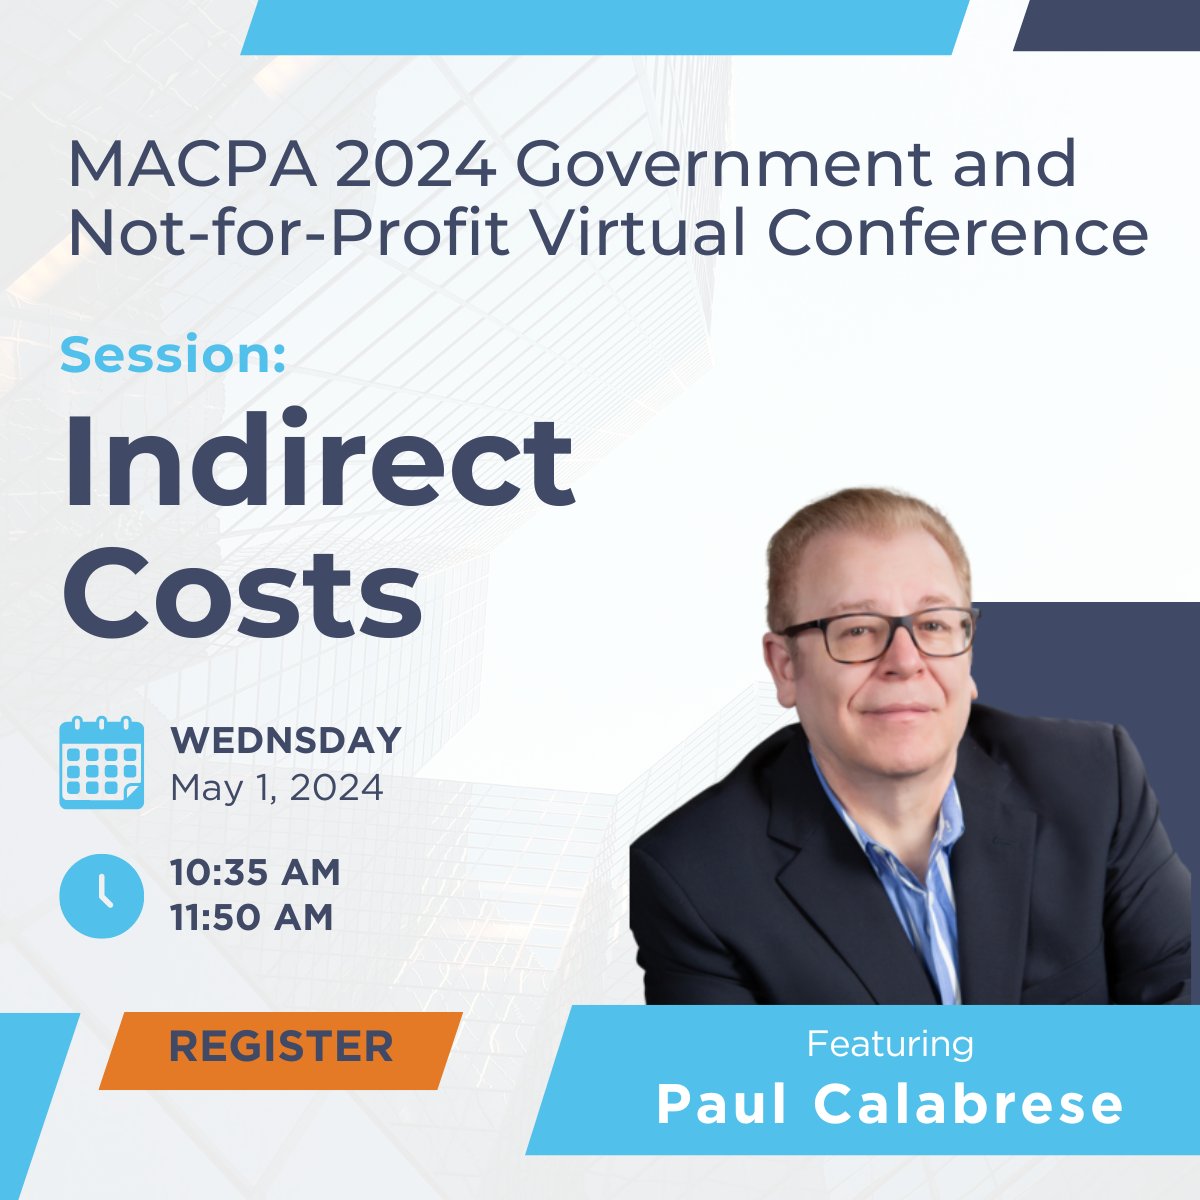 Catch GRF's Paul Calabrese at the MACPA 2024 Govt & NFP Virtual Conference. Gain actionable insights on managing indirect cost rates for your organization's financial needs.
hubs.la/Q02sTWJS0
#grfcpa #accounting #CECL #MACPA #nonprofit #cpa